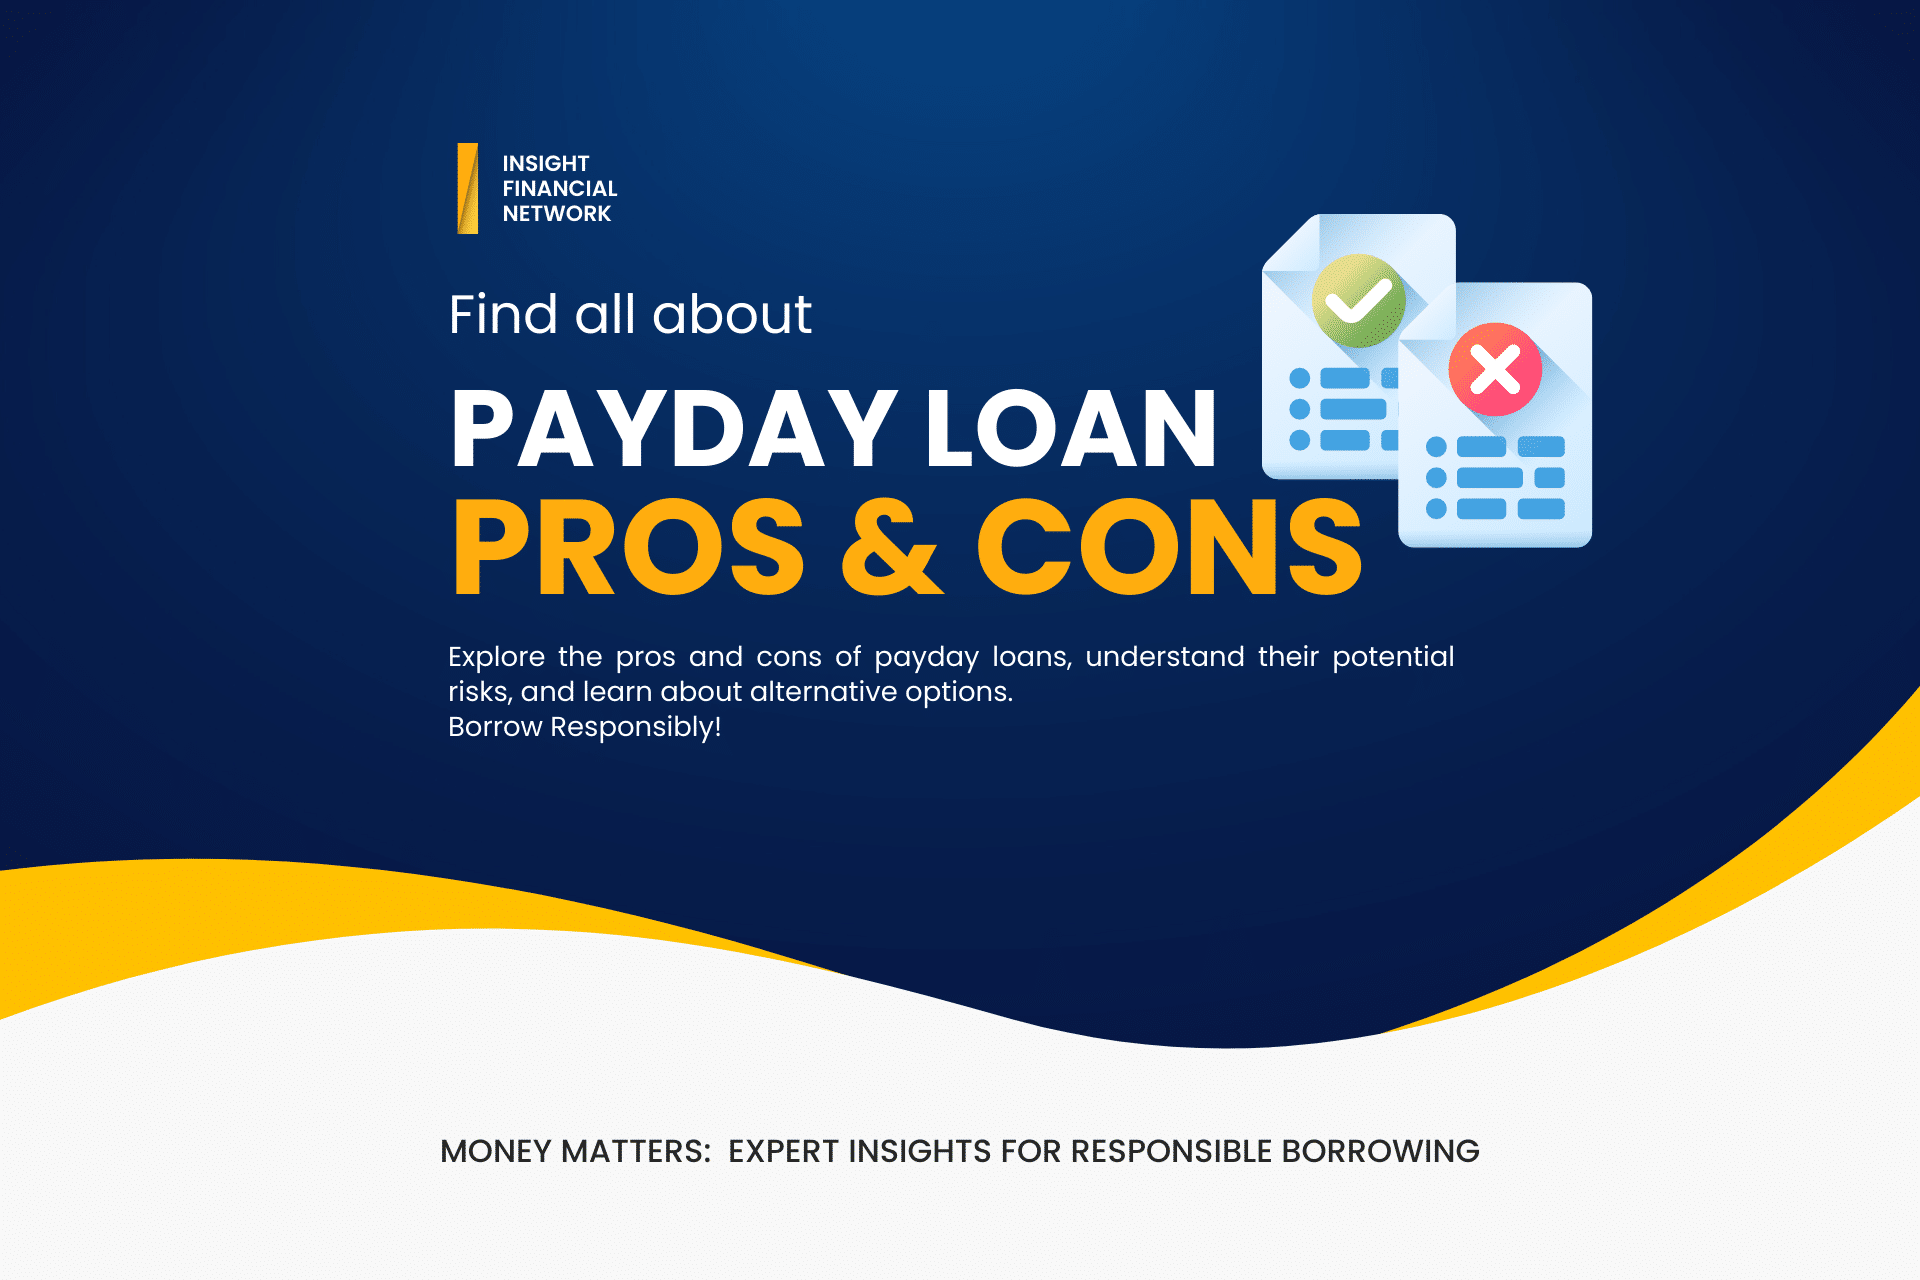 Payday loans pros and cons